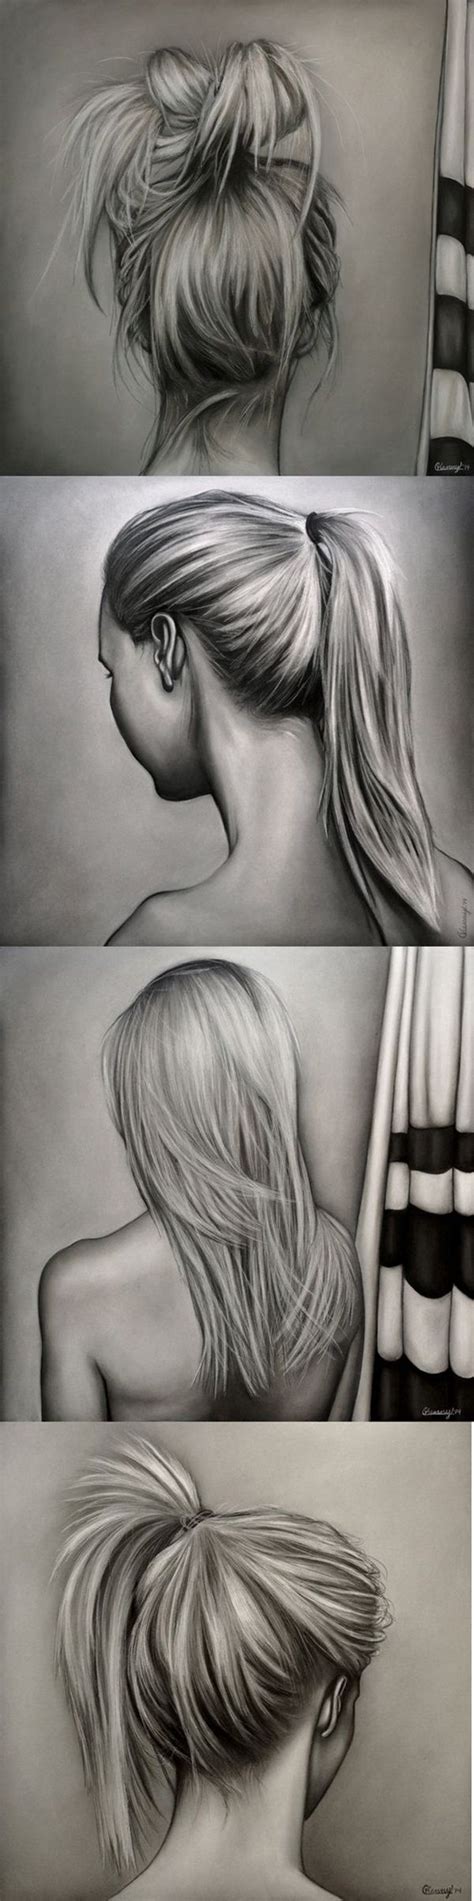 How To Draw Hair Step By Step Image Guides Realistic Drawings How